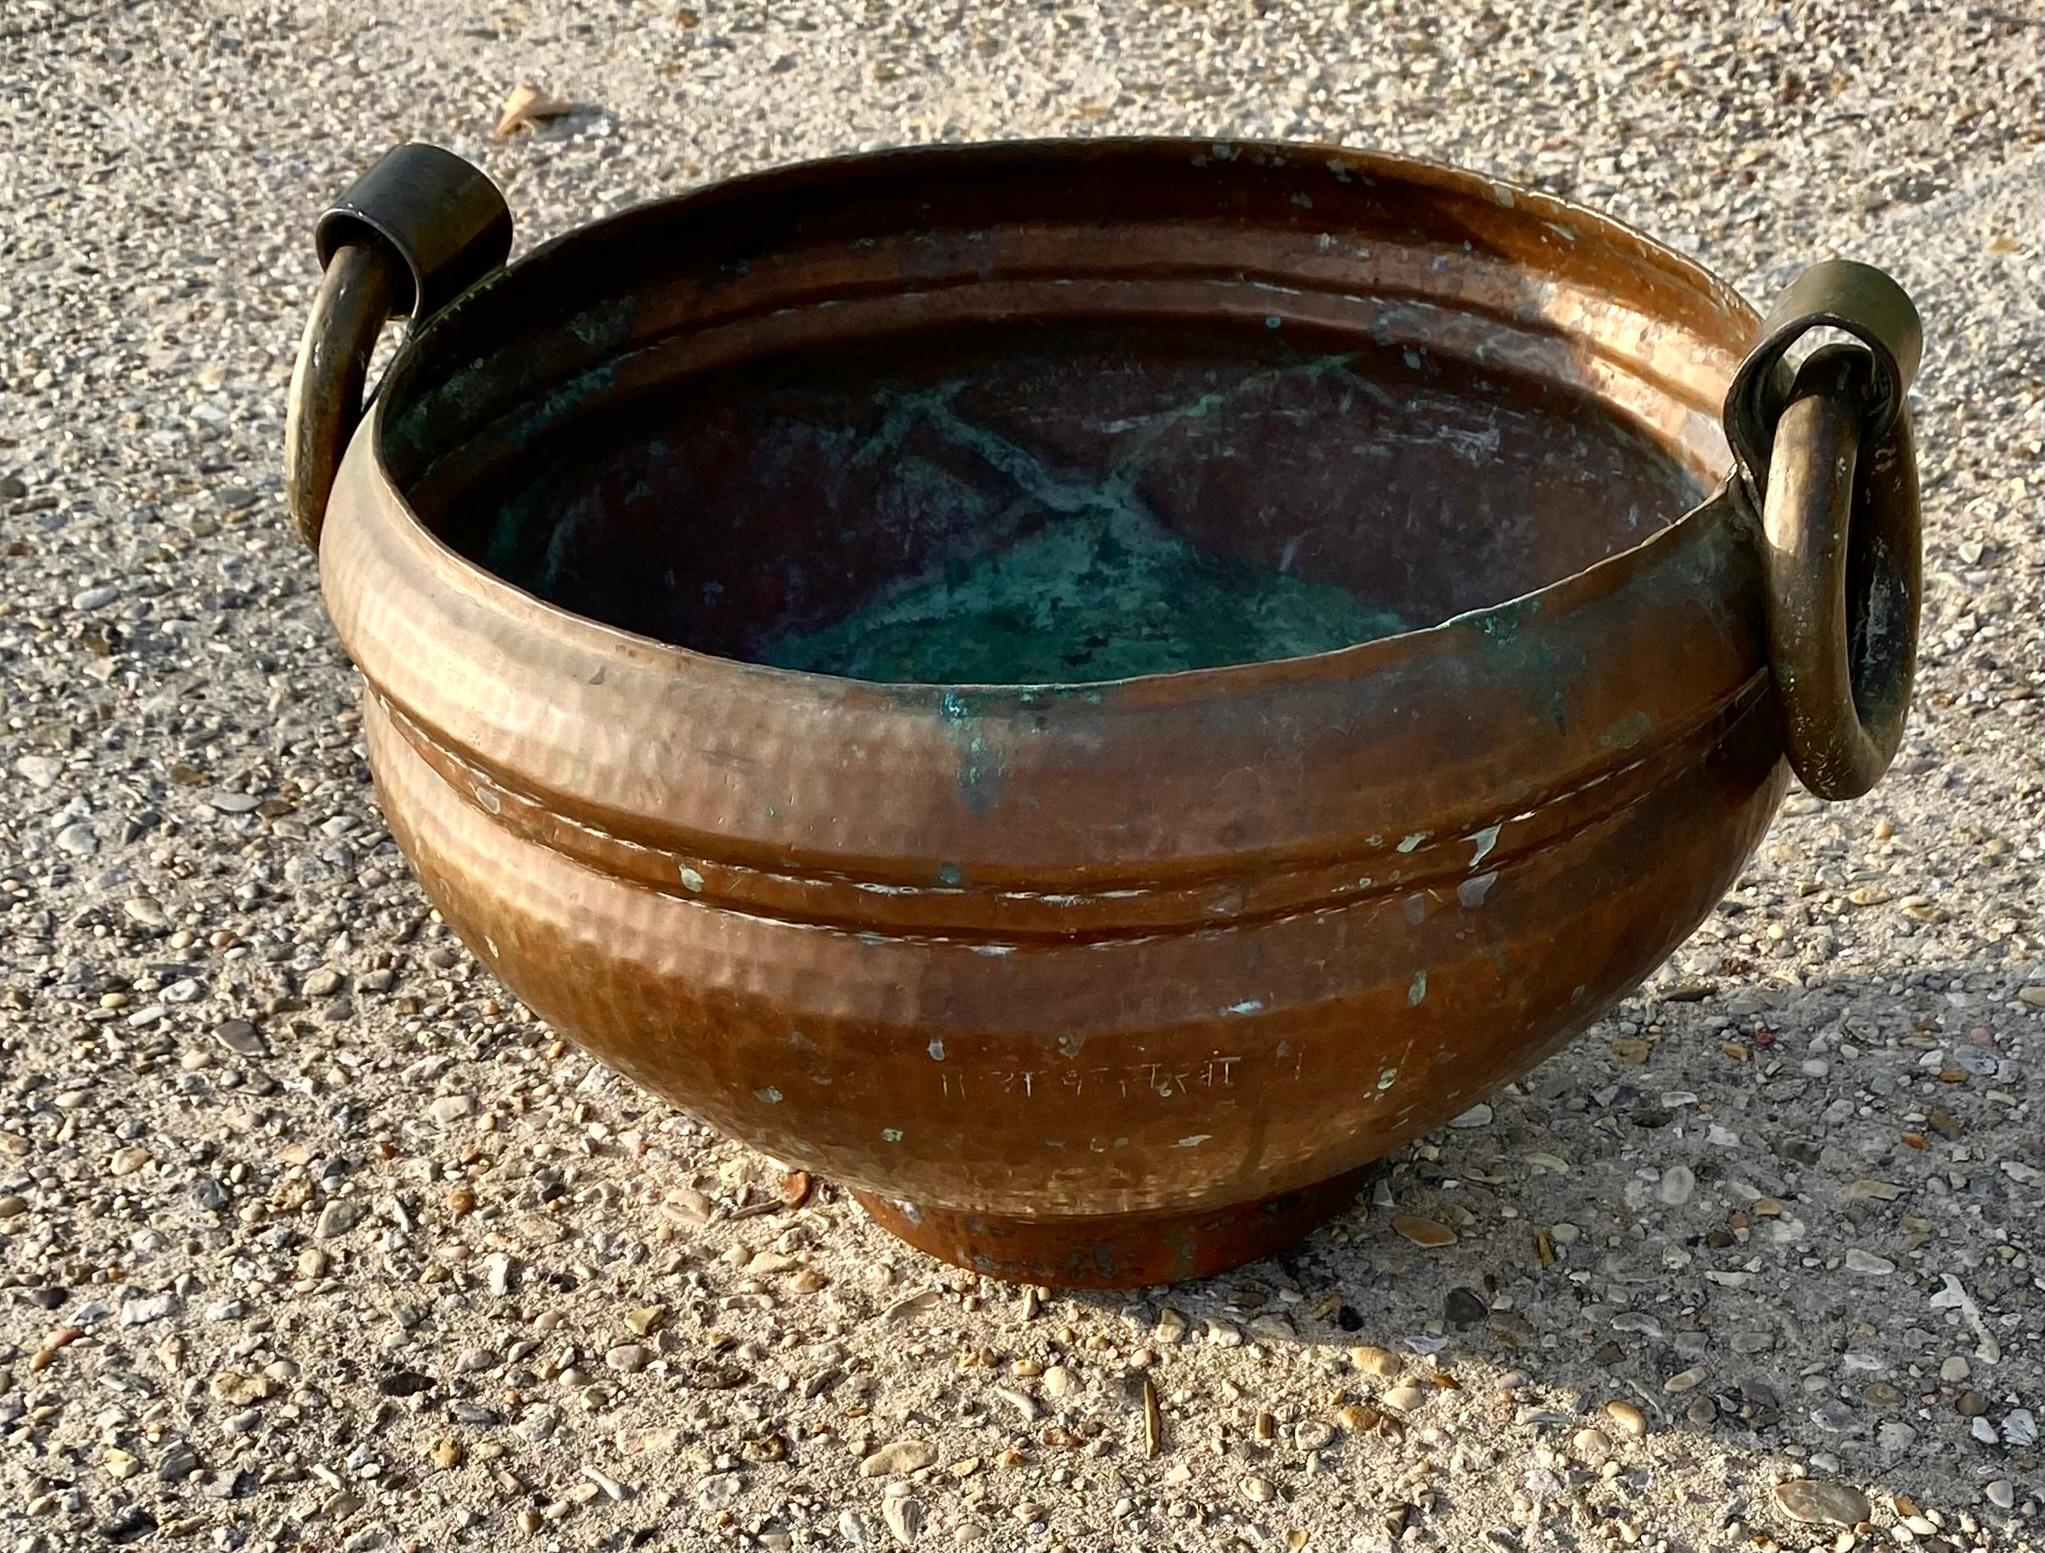 A 1920's hand hammered Turkish tribal, copper, iron and brass water pot. In original condition, non-altered with an old outstanding patina and color. Beautiful time worn Verdigris in the interior. Heavy and solid.

Rich texture for decorating your